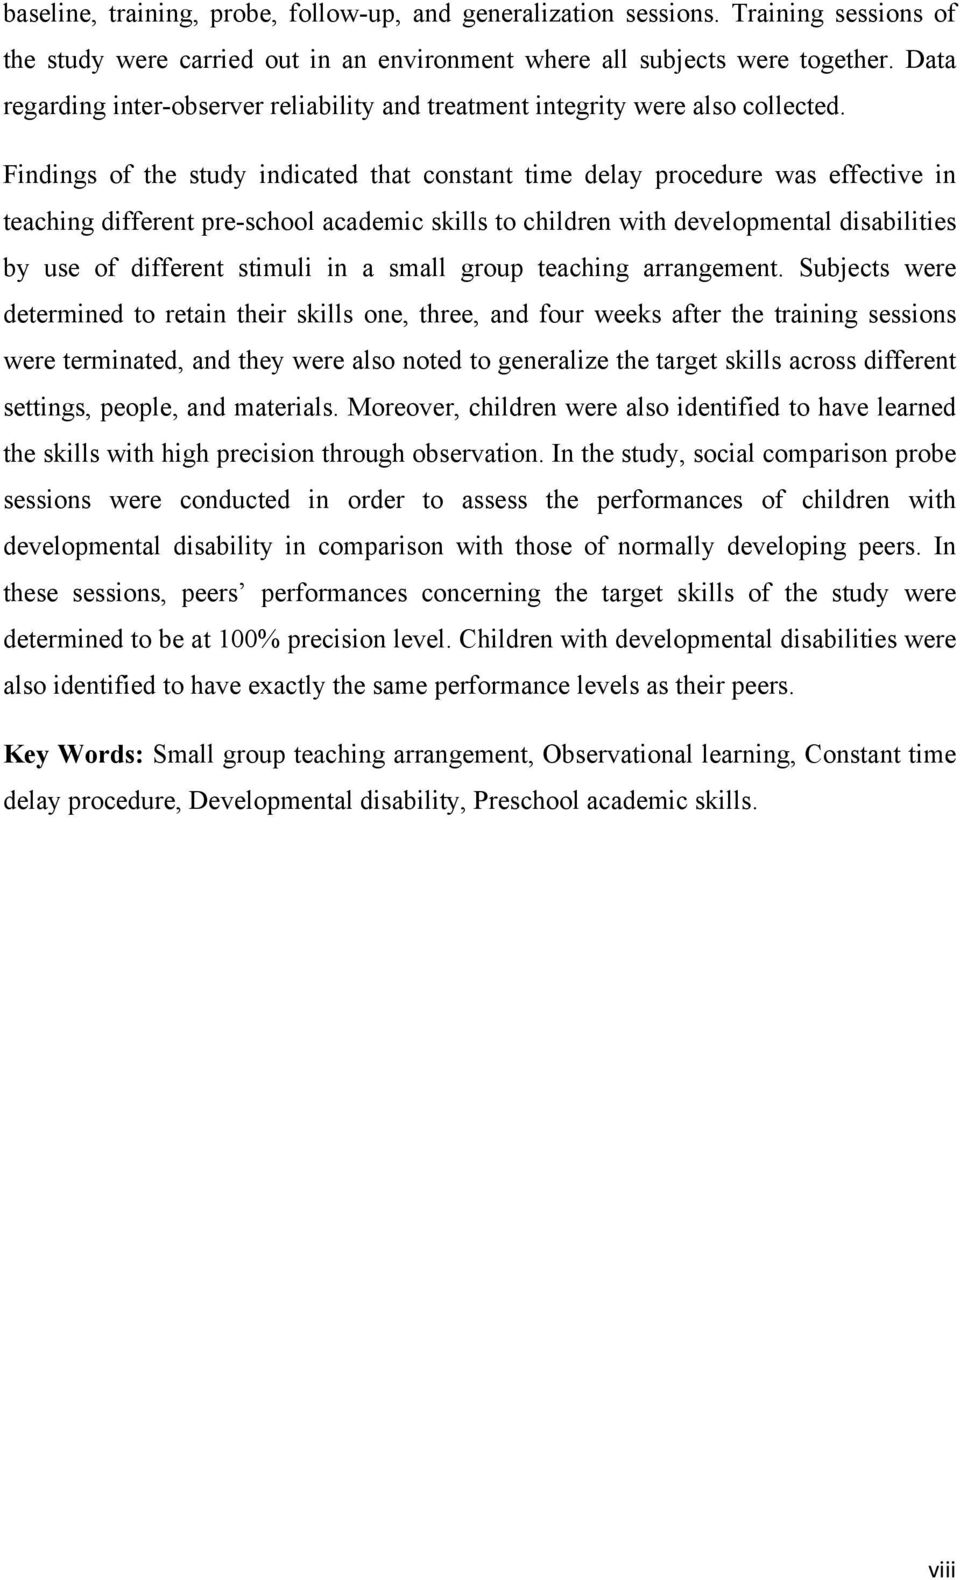 Findings of the study indicated that constant time delay procedure was effective in teaching different pre-school academic skills to children with developmental disabilities by use of different